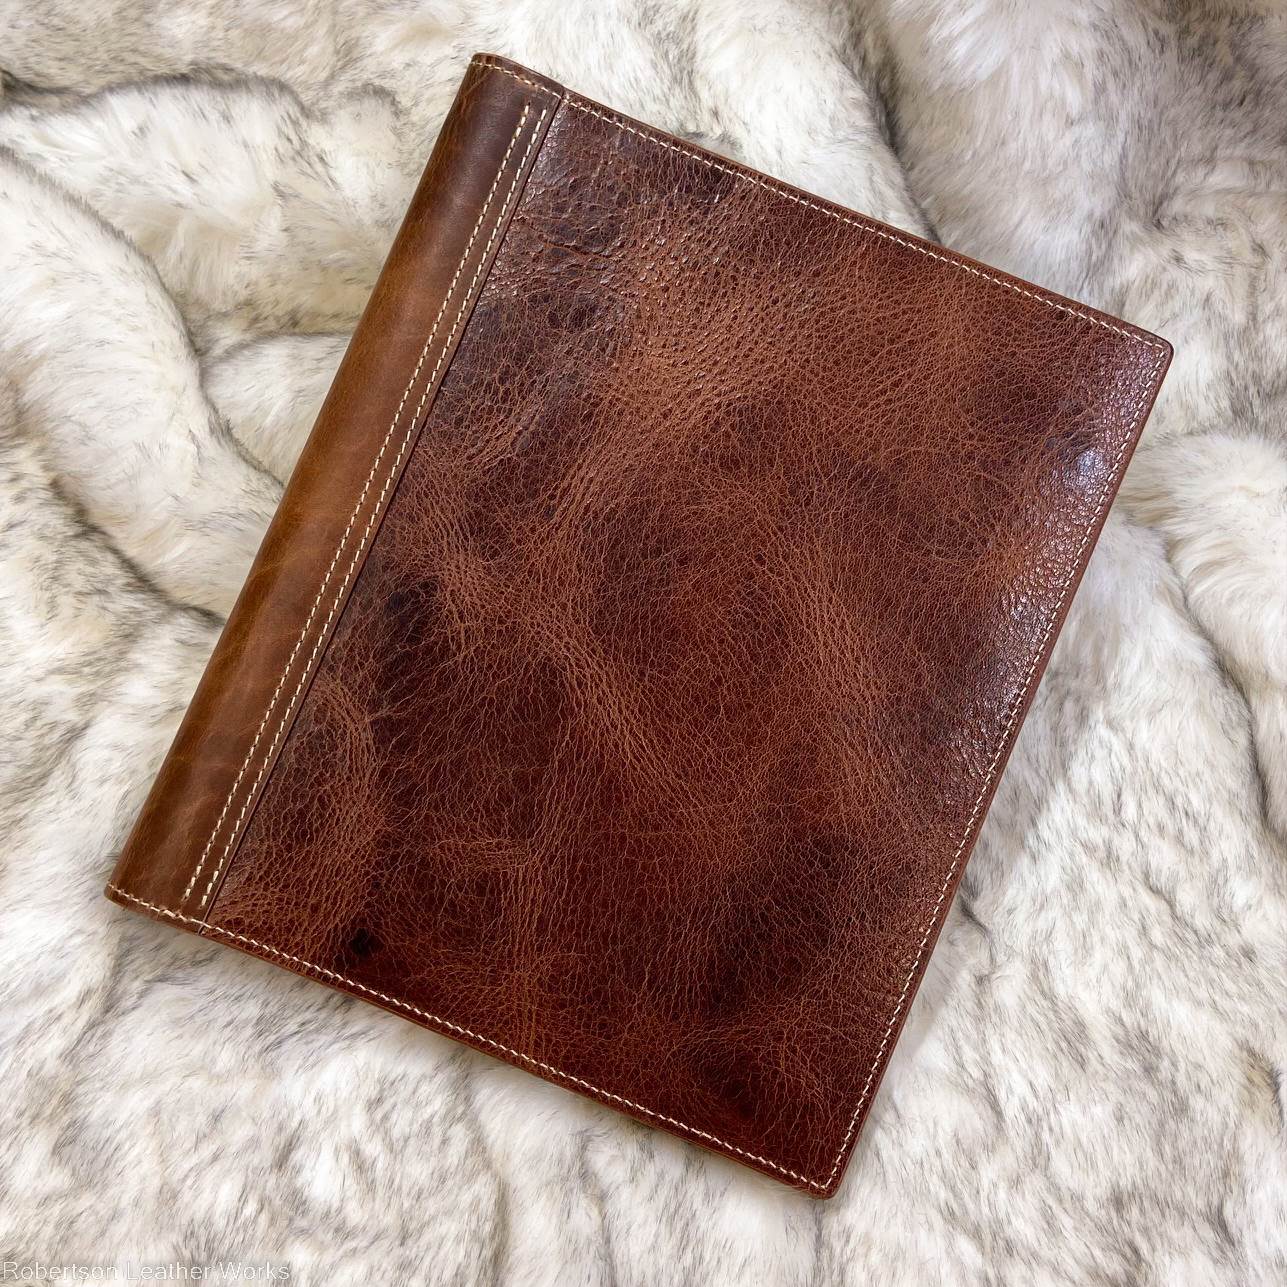 Legal Pad Cover in Antique Tan Water Buffalo